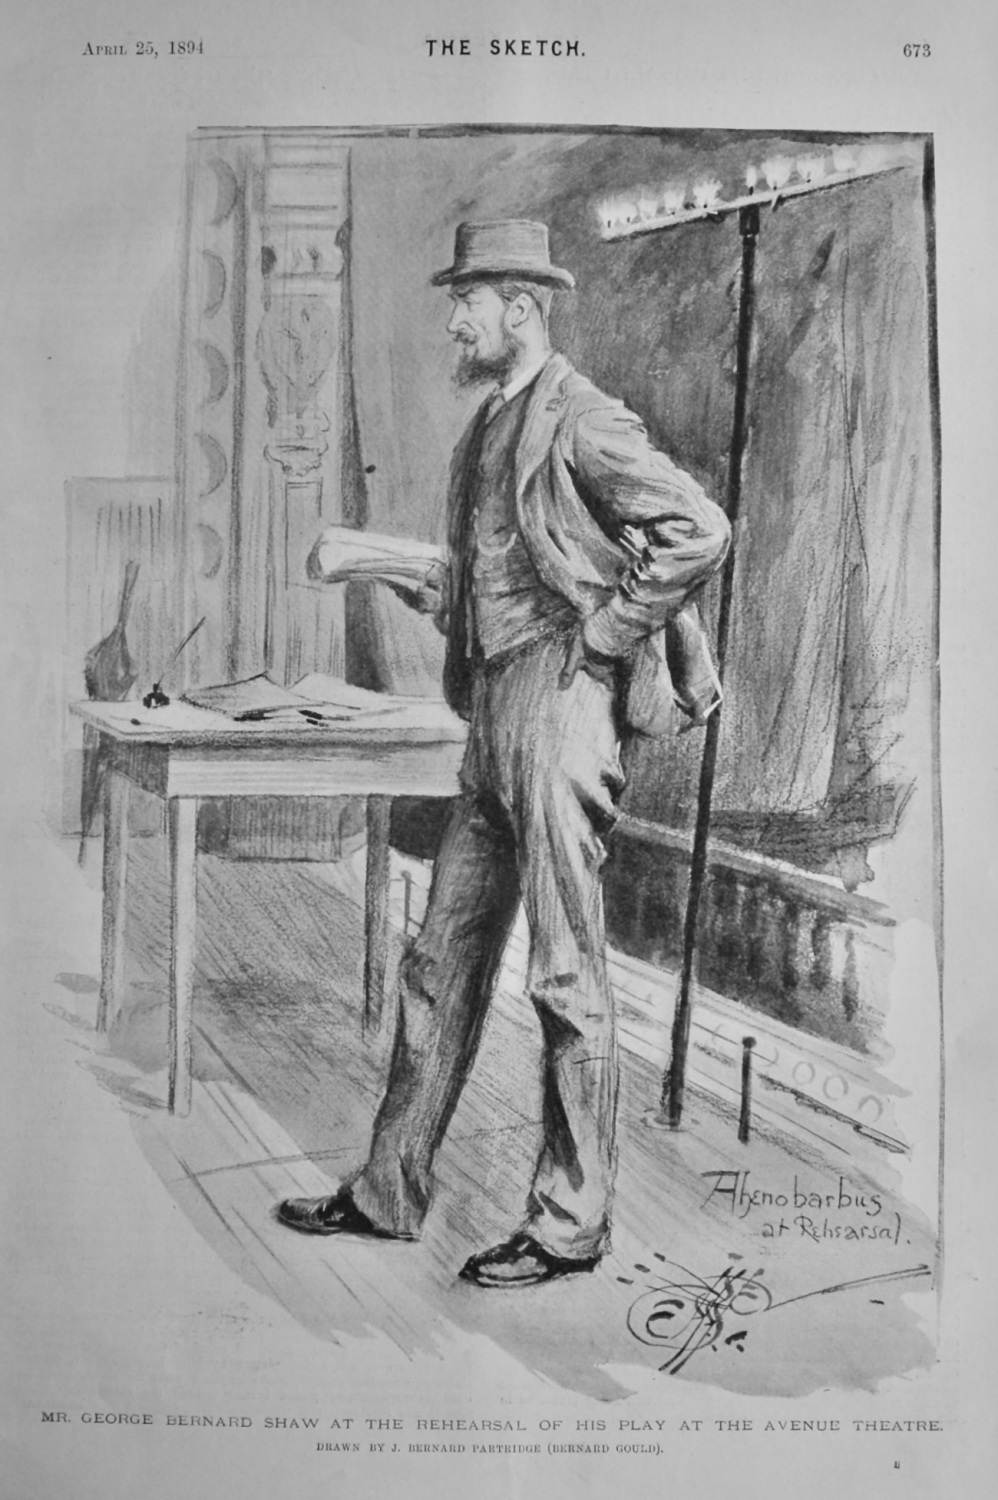 Mr. George Bernard Shaw at the Rehearsal of His Play at the Avenue Theatre.